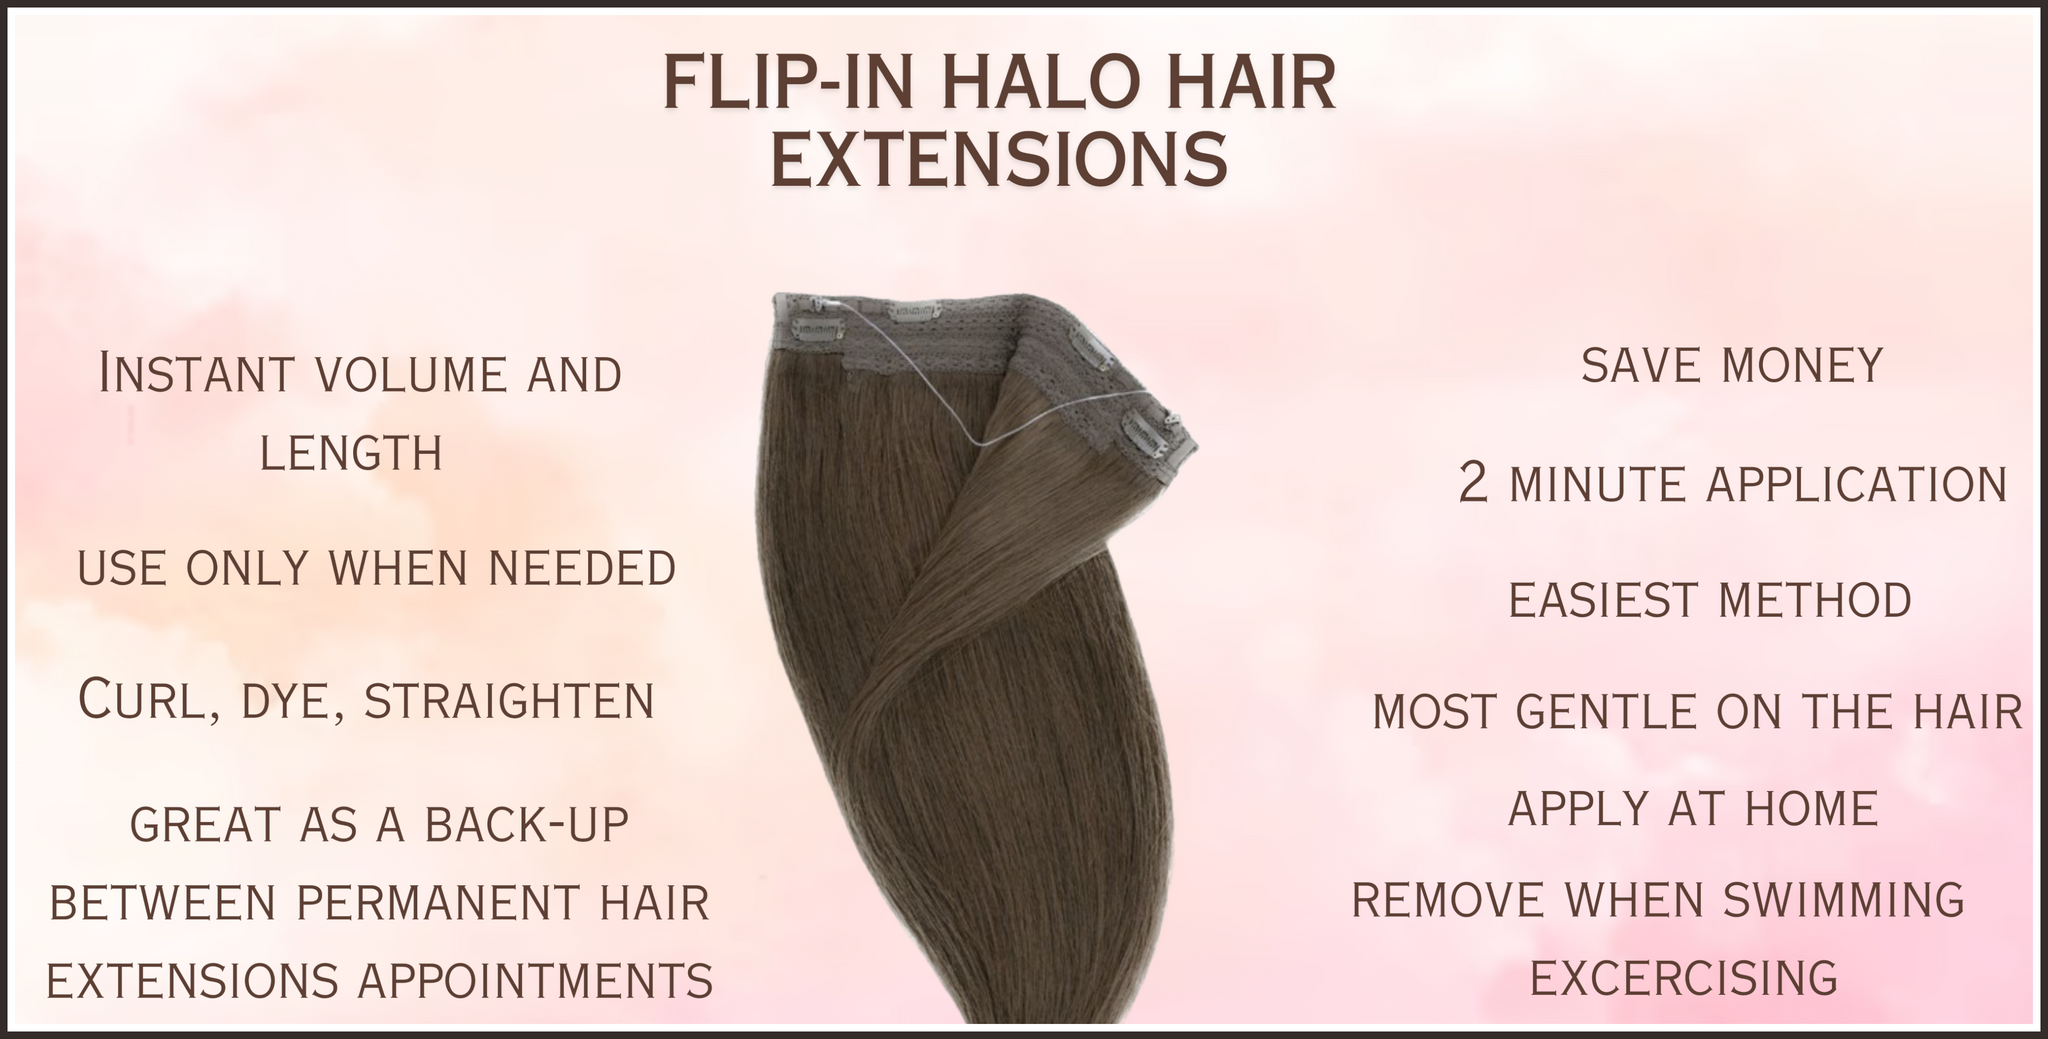 What are the benefits of halo hair extensions?